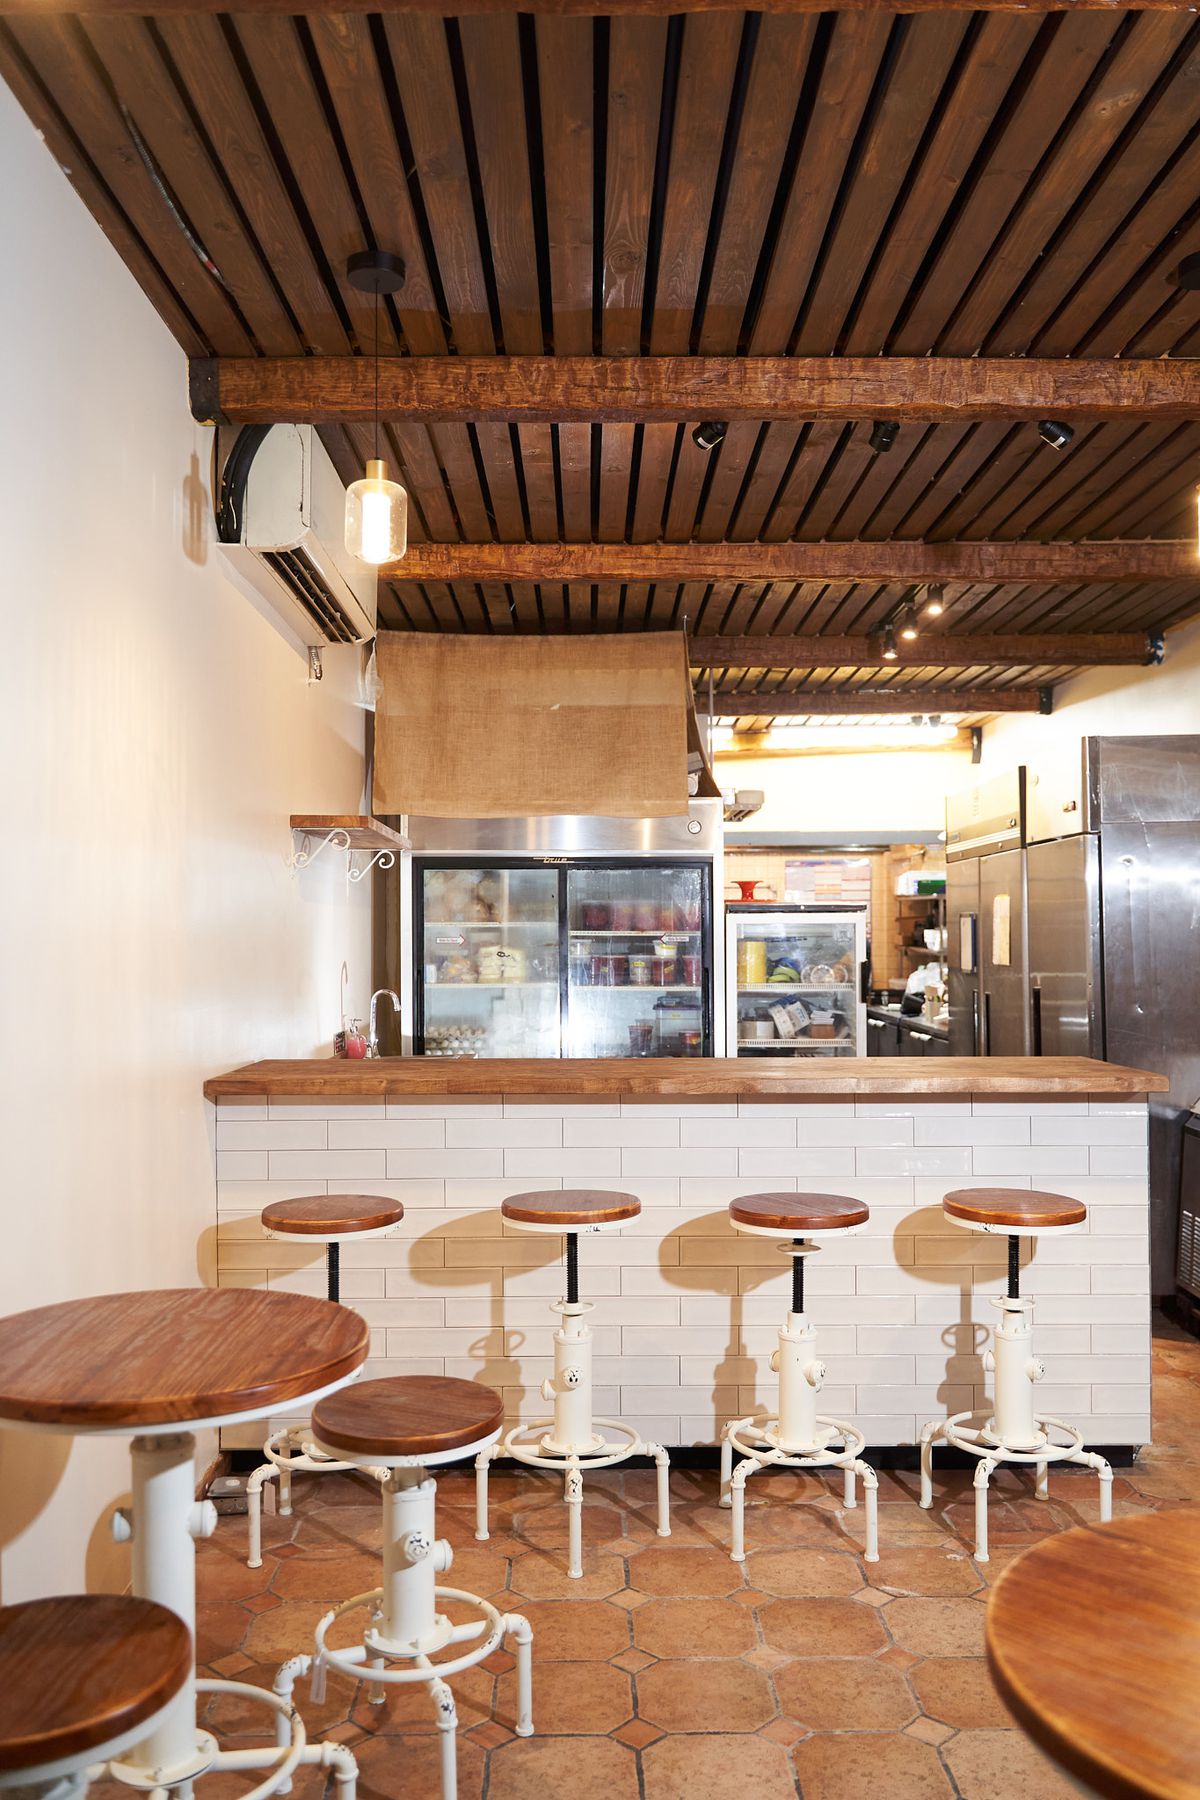 An interior view of a restaurant with a wood-topped counter and stools against a white brick bar.